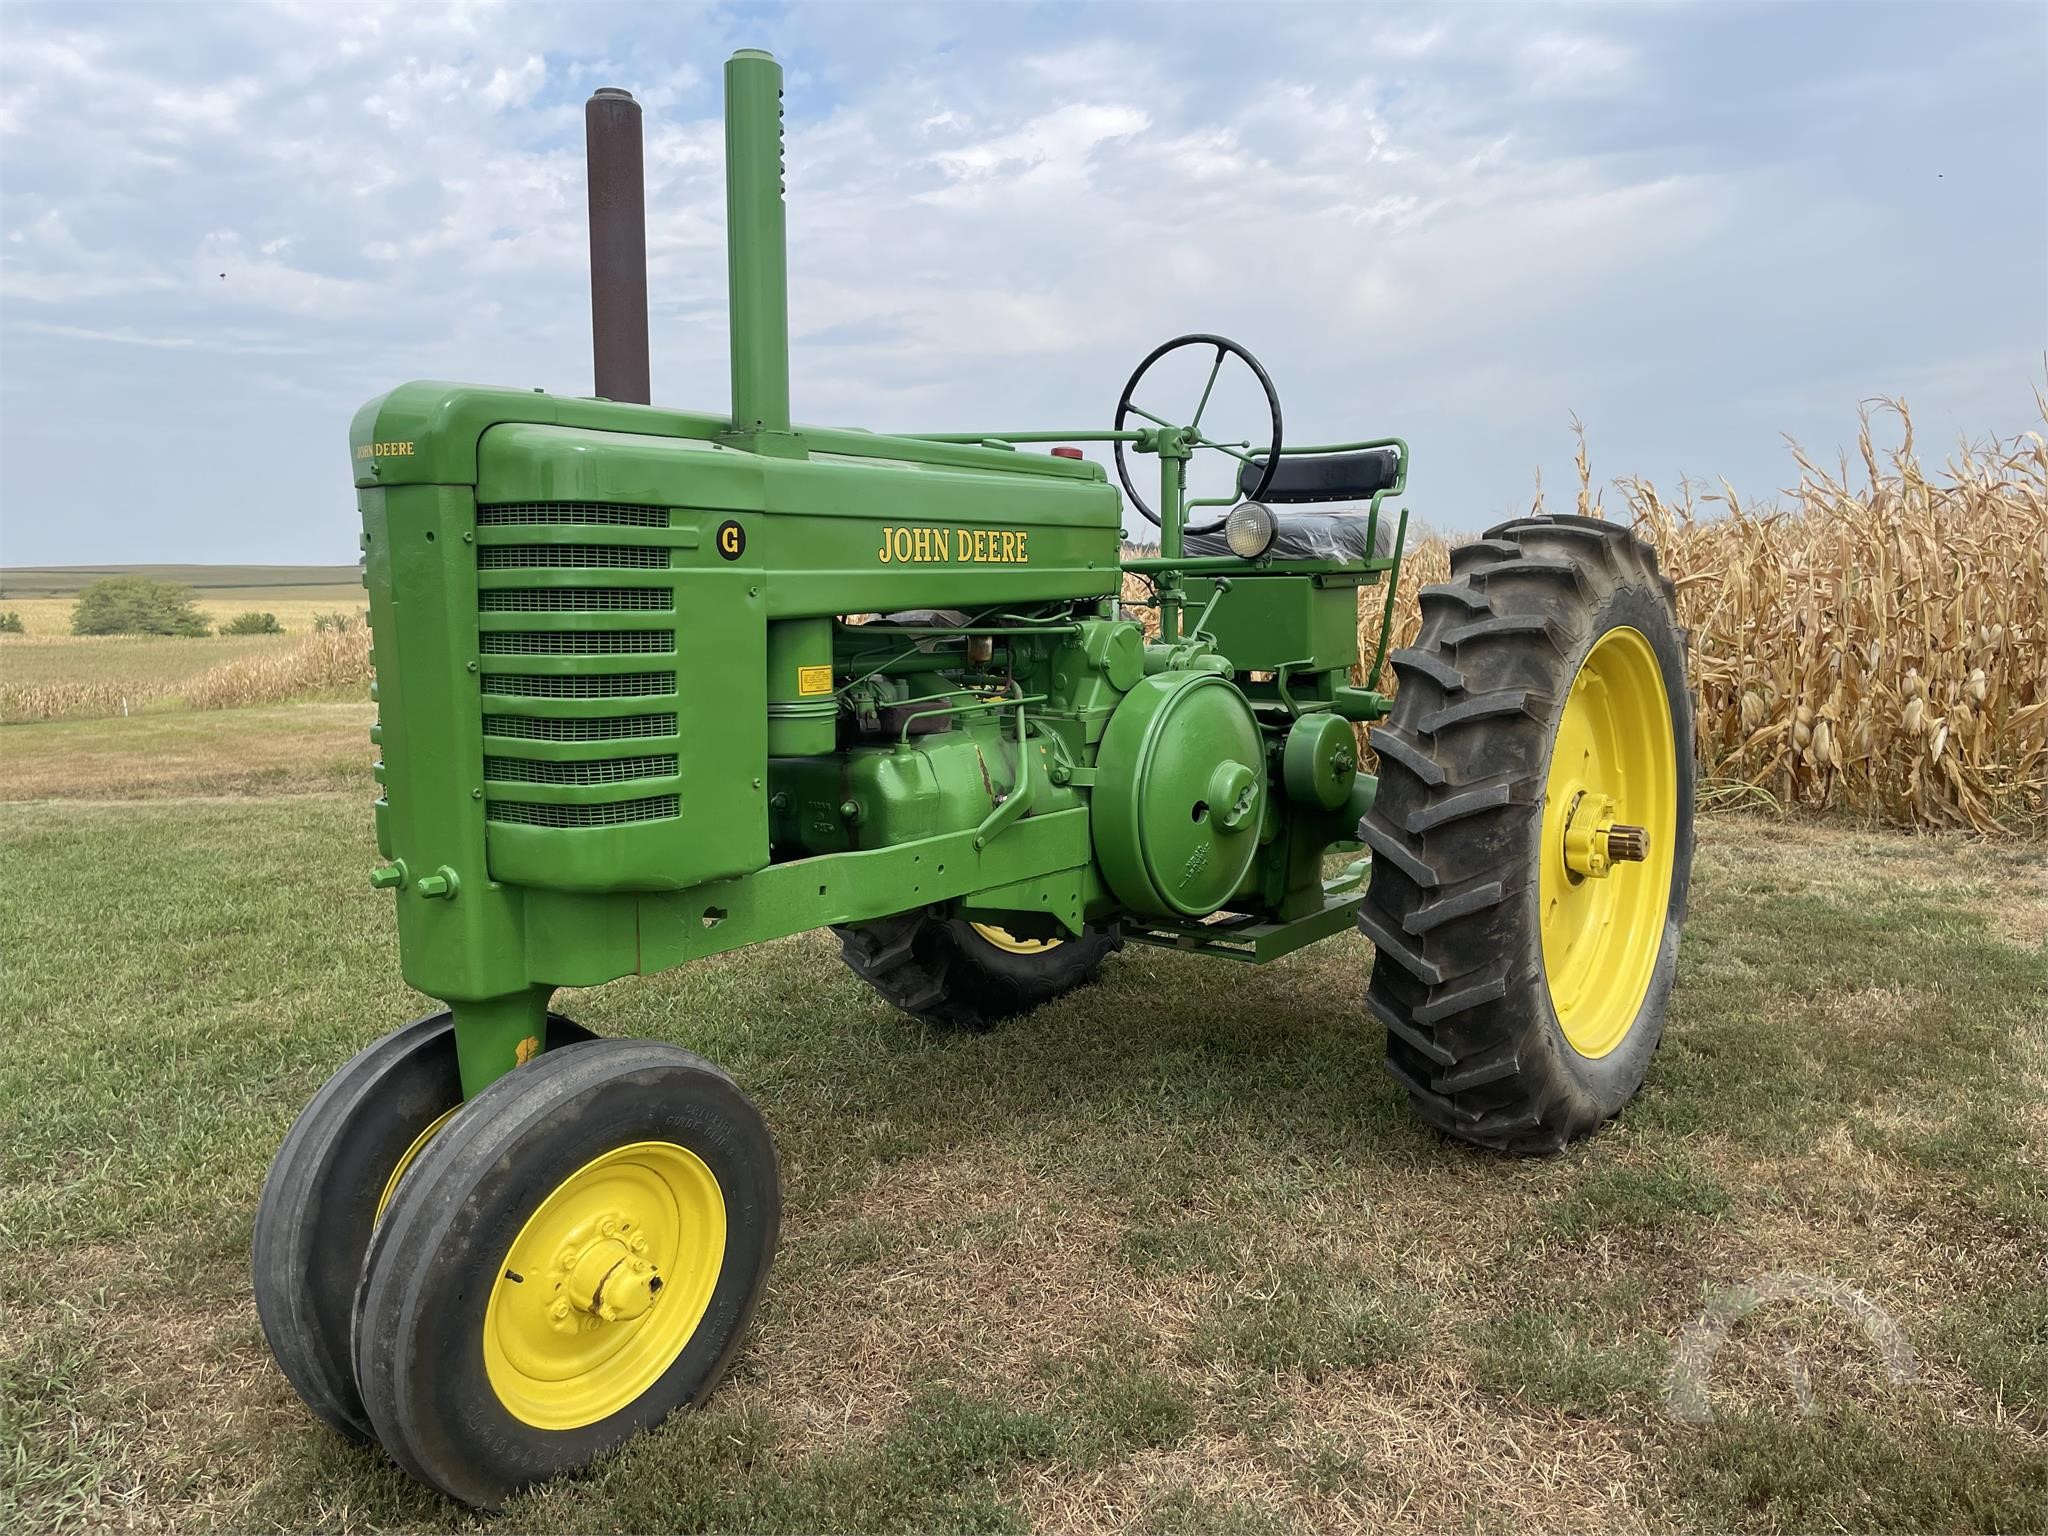 Premier Auctions - Farm Auctions, Business Dispersal Auctions, and Real  Estate Auctions in Alberta, Saskatchewan, Manitoba and British Columbia